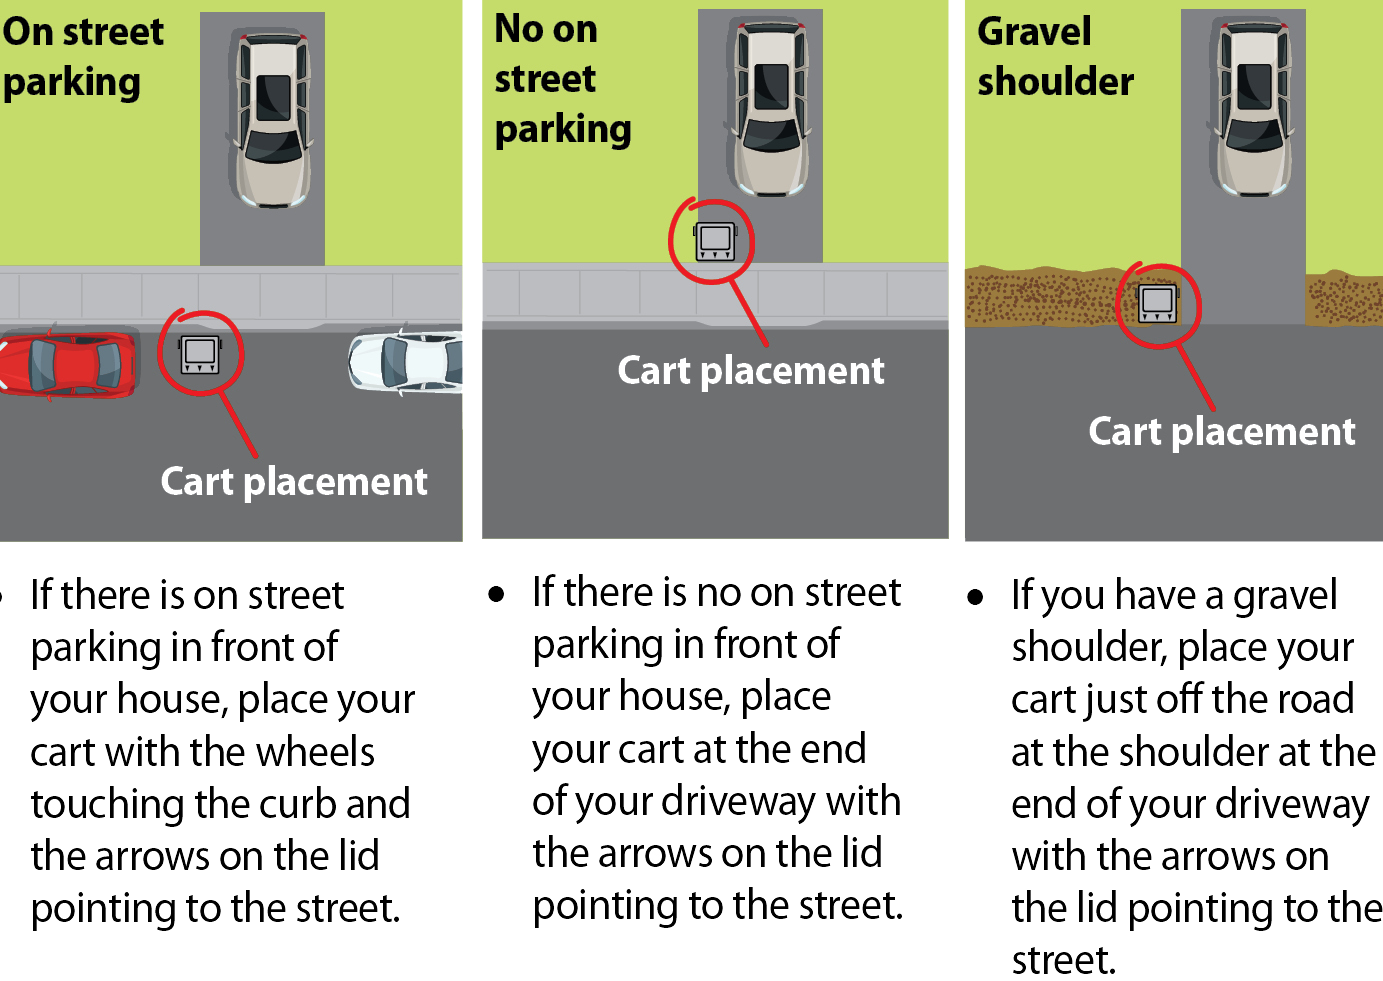 3 images showing how to place your garbage cart for collection. Left image, on street parking, cart goes to the street with wheels to the curb. Center image, no on street parking, cart goes to the end of your driveway. Right image, gravel shoulder, cart goes on the gravel shoulder at the end of your driveway.